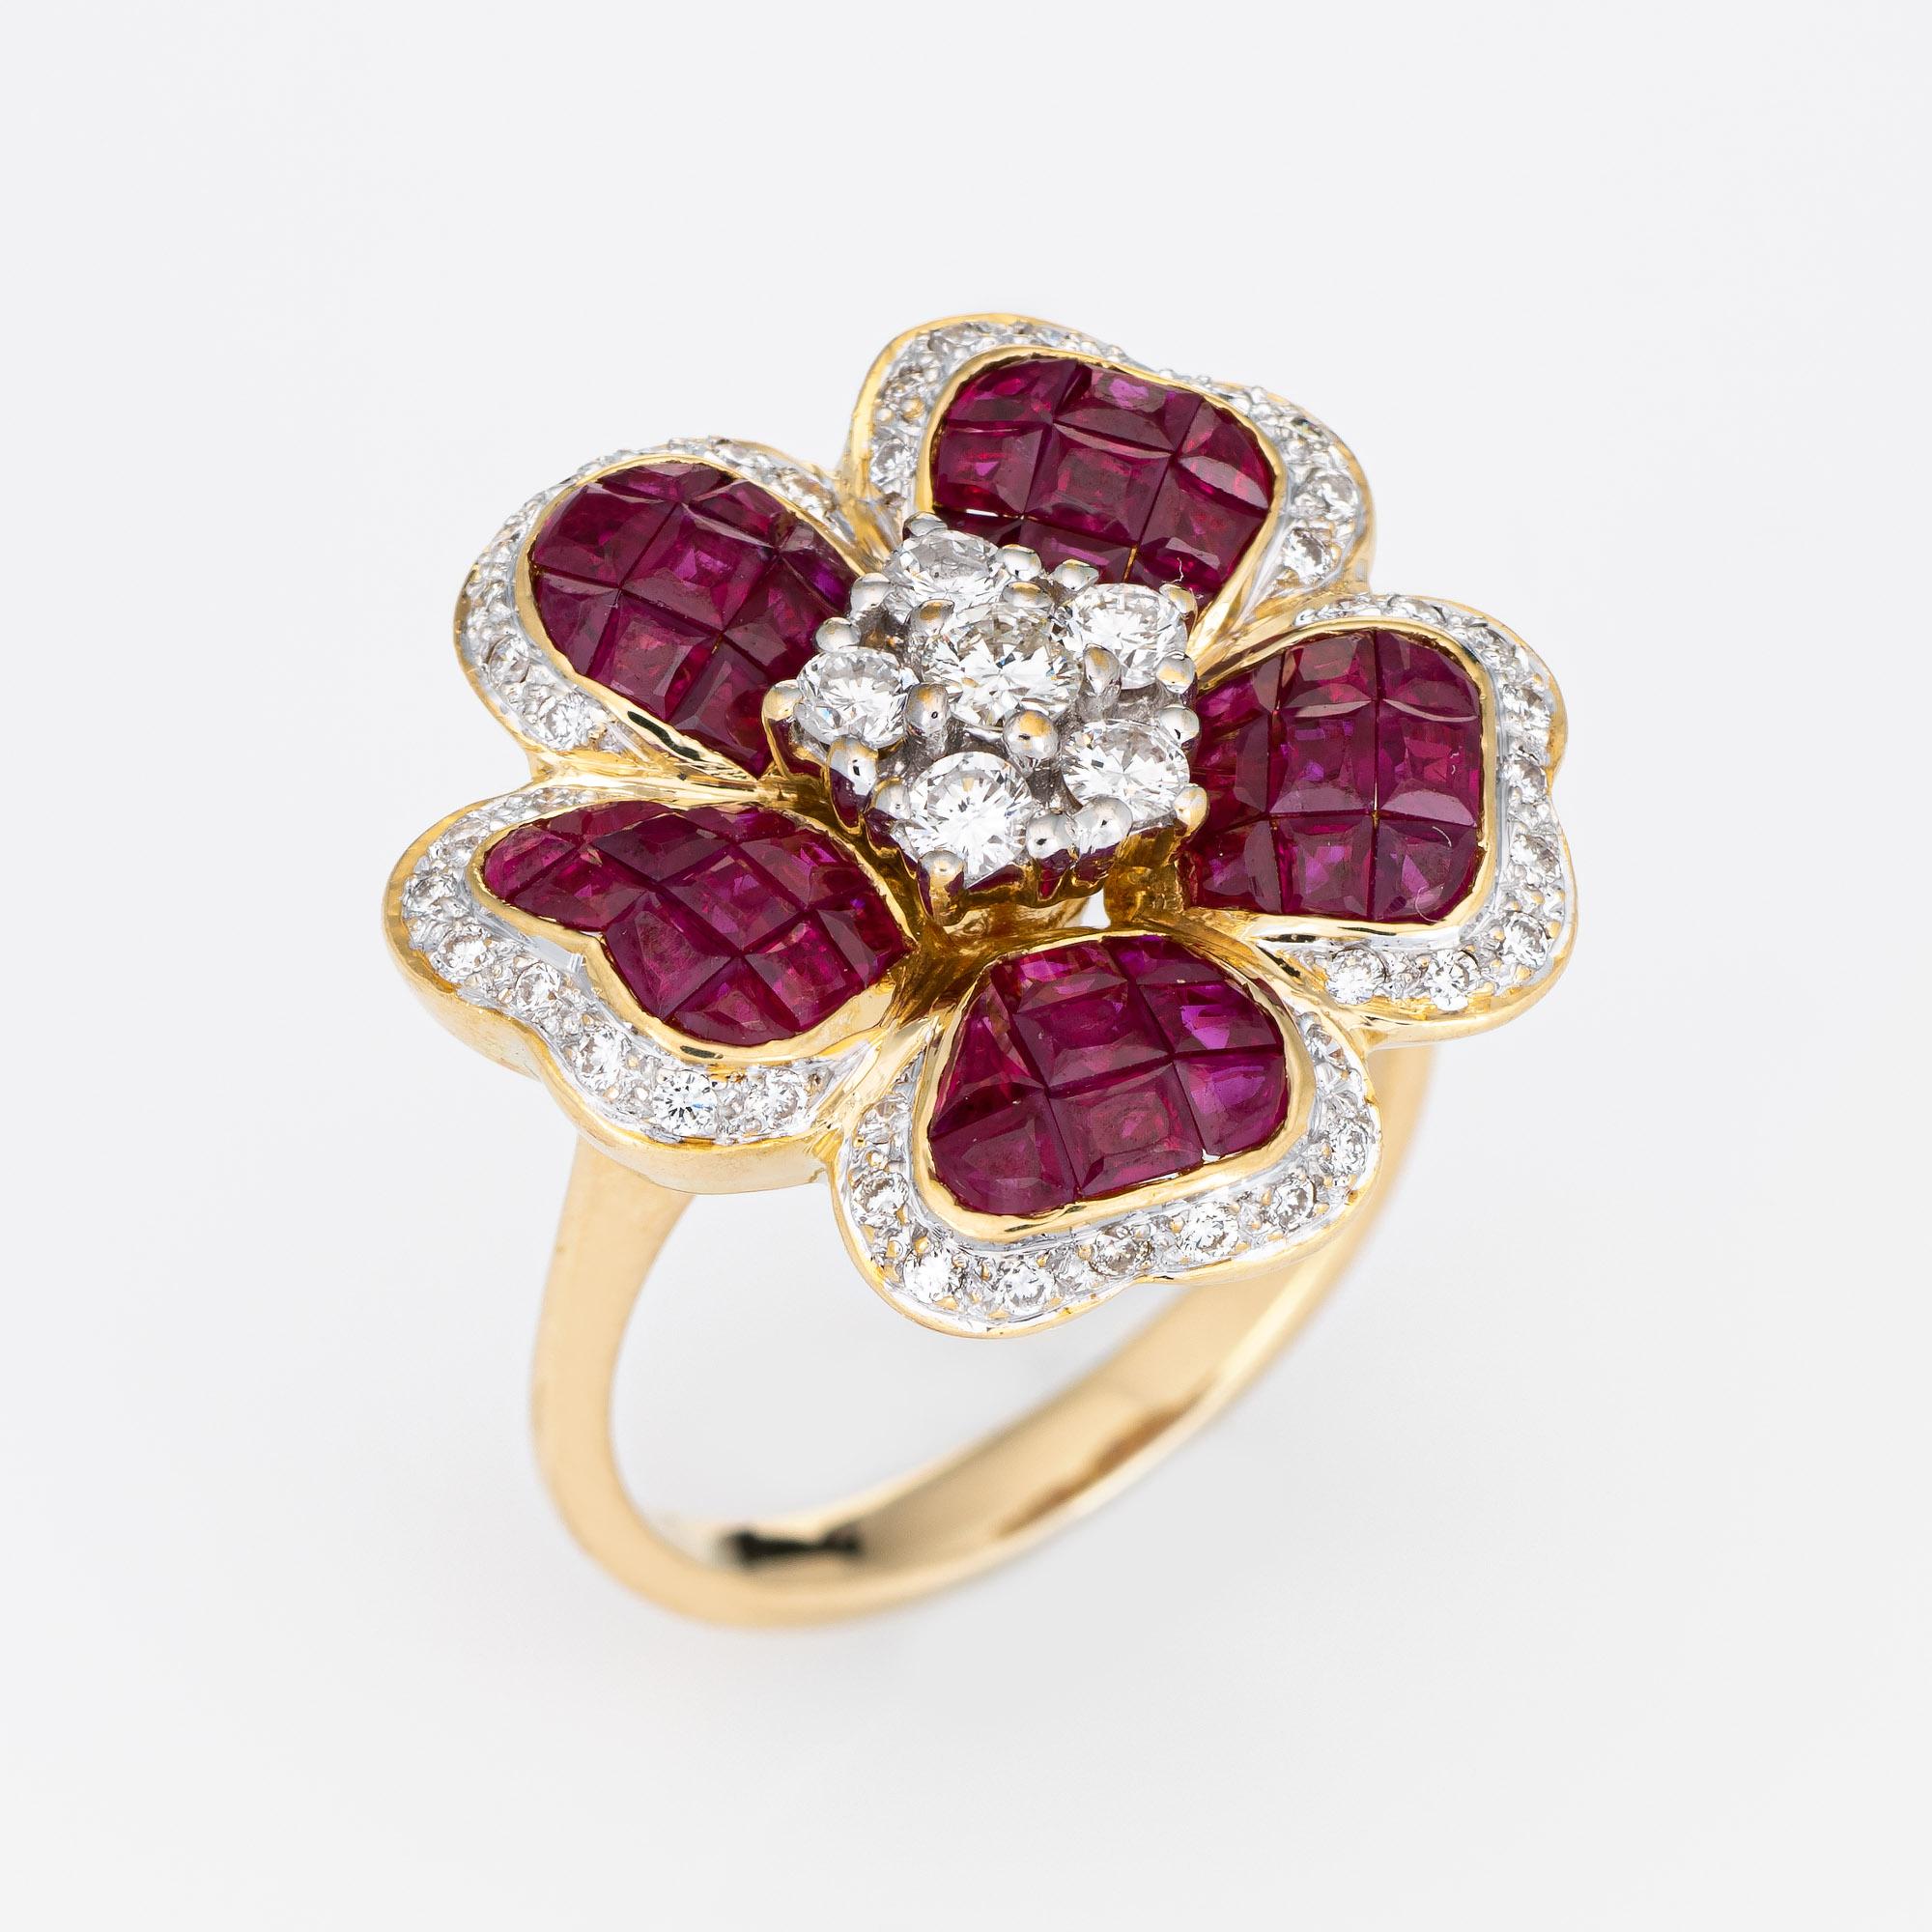 Stylish vintage invisible set ruby & diamond ring (circa 1980s to 1990s) crafted in 18 karat yellow gold. 

Round brilliant cut diamonds total an estimated 0.50 carats (estimated at G-H color and VS1-2 clarity). The rubies total an estimated 2.25